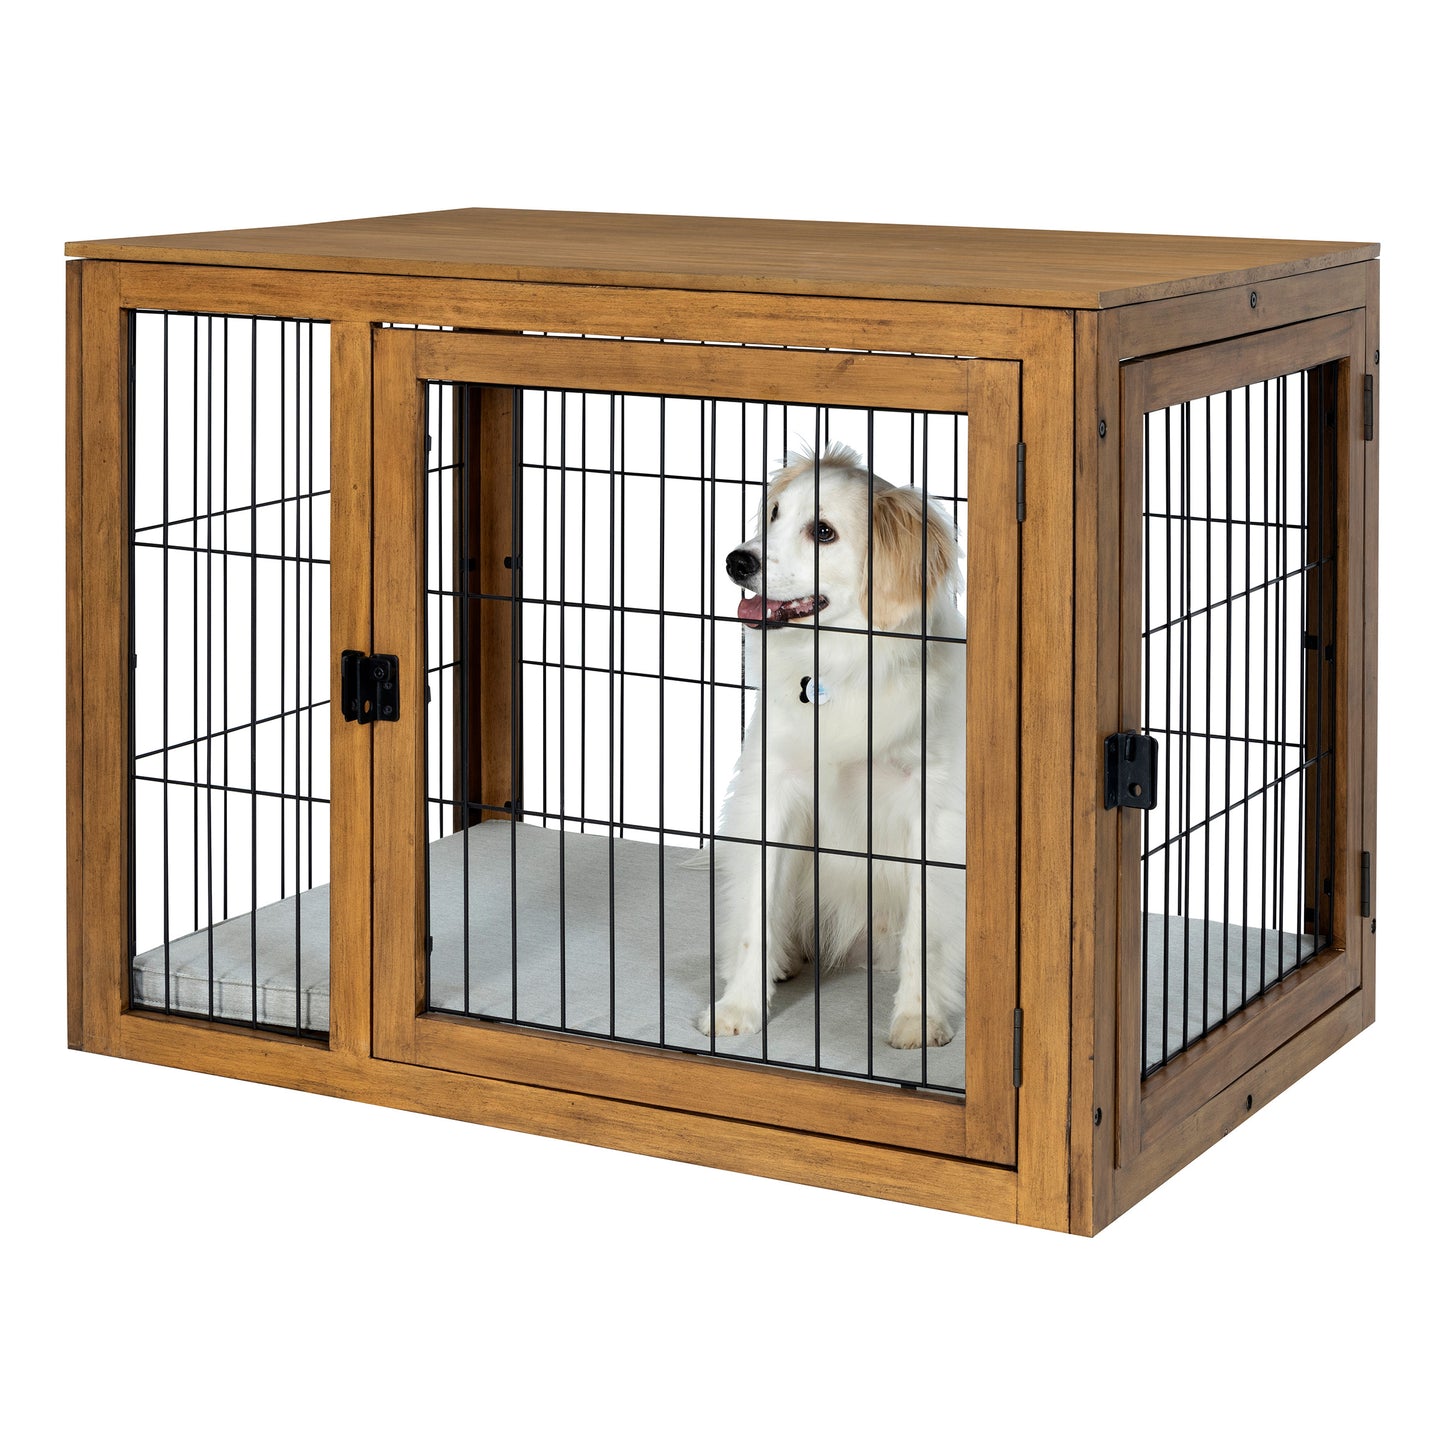 Furniture-Style Dog Crate, Natural